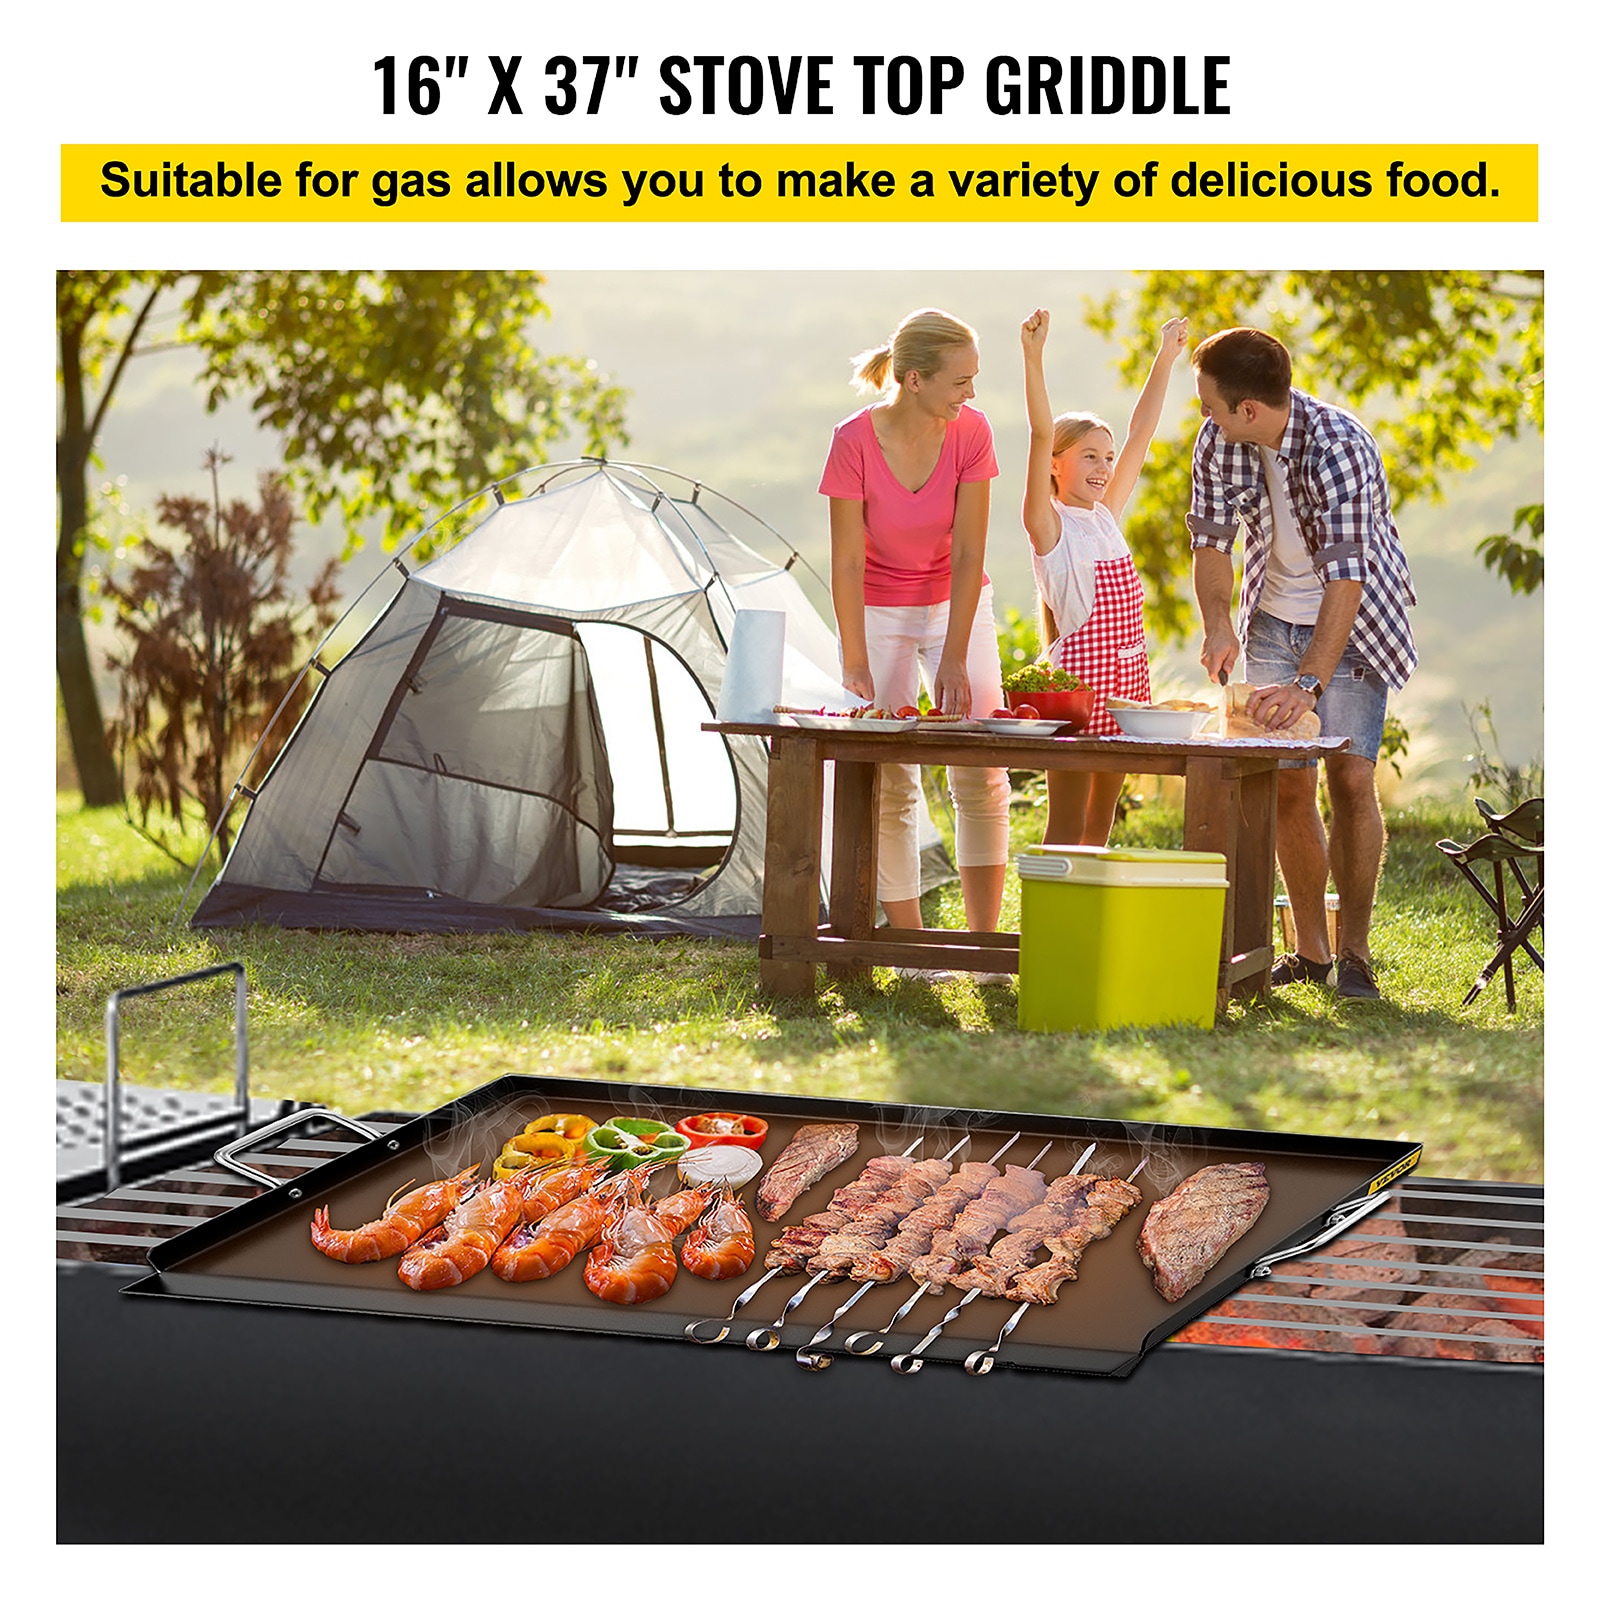 How To Use Stove Top Griddle